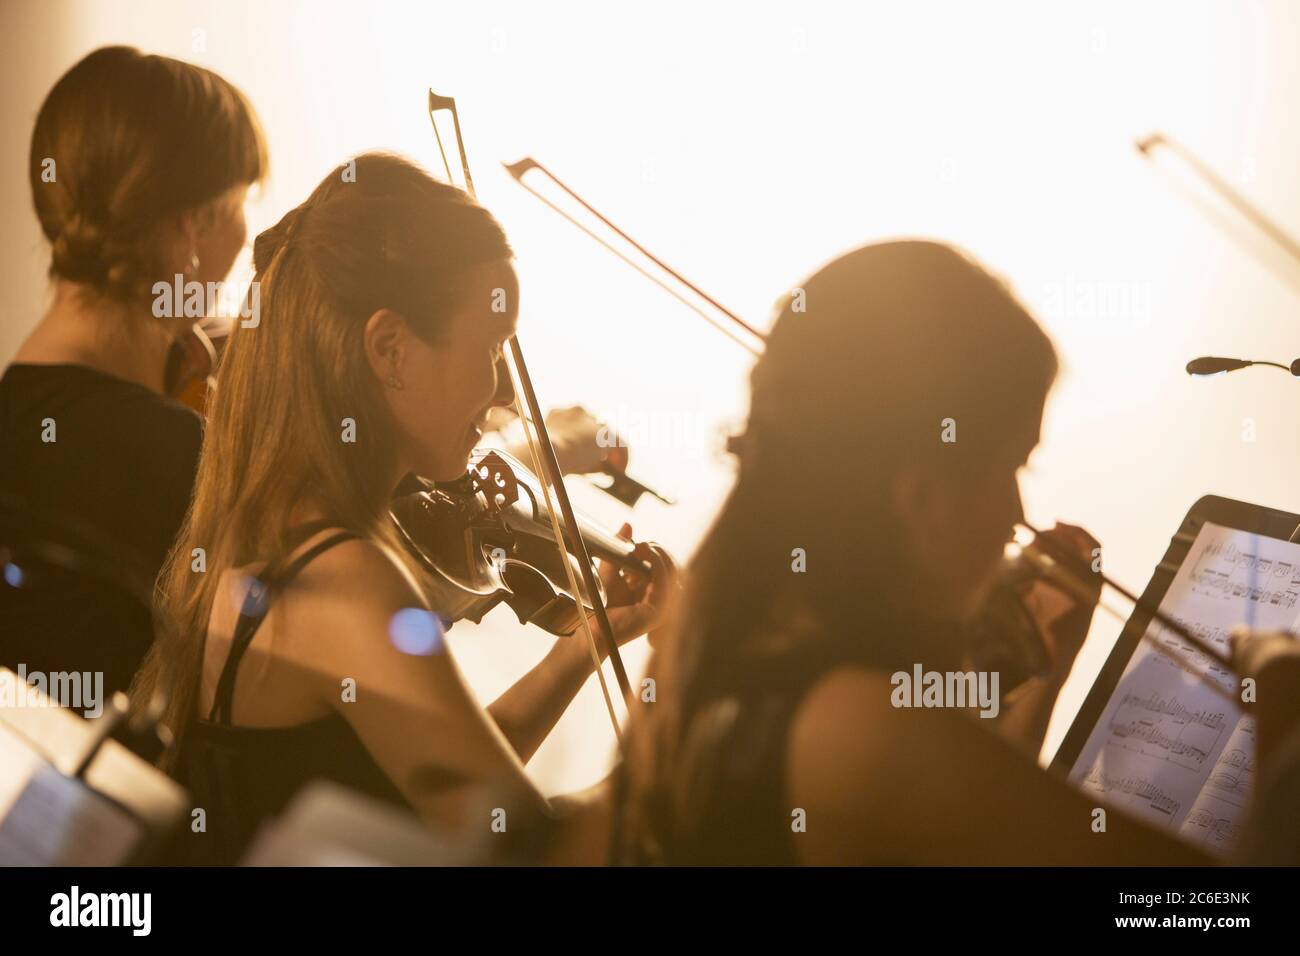 Silhouette of orchestra performing Stock Photo